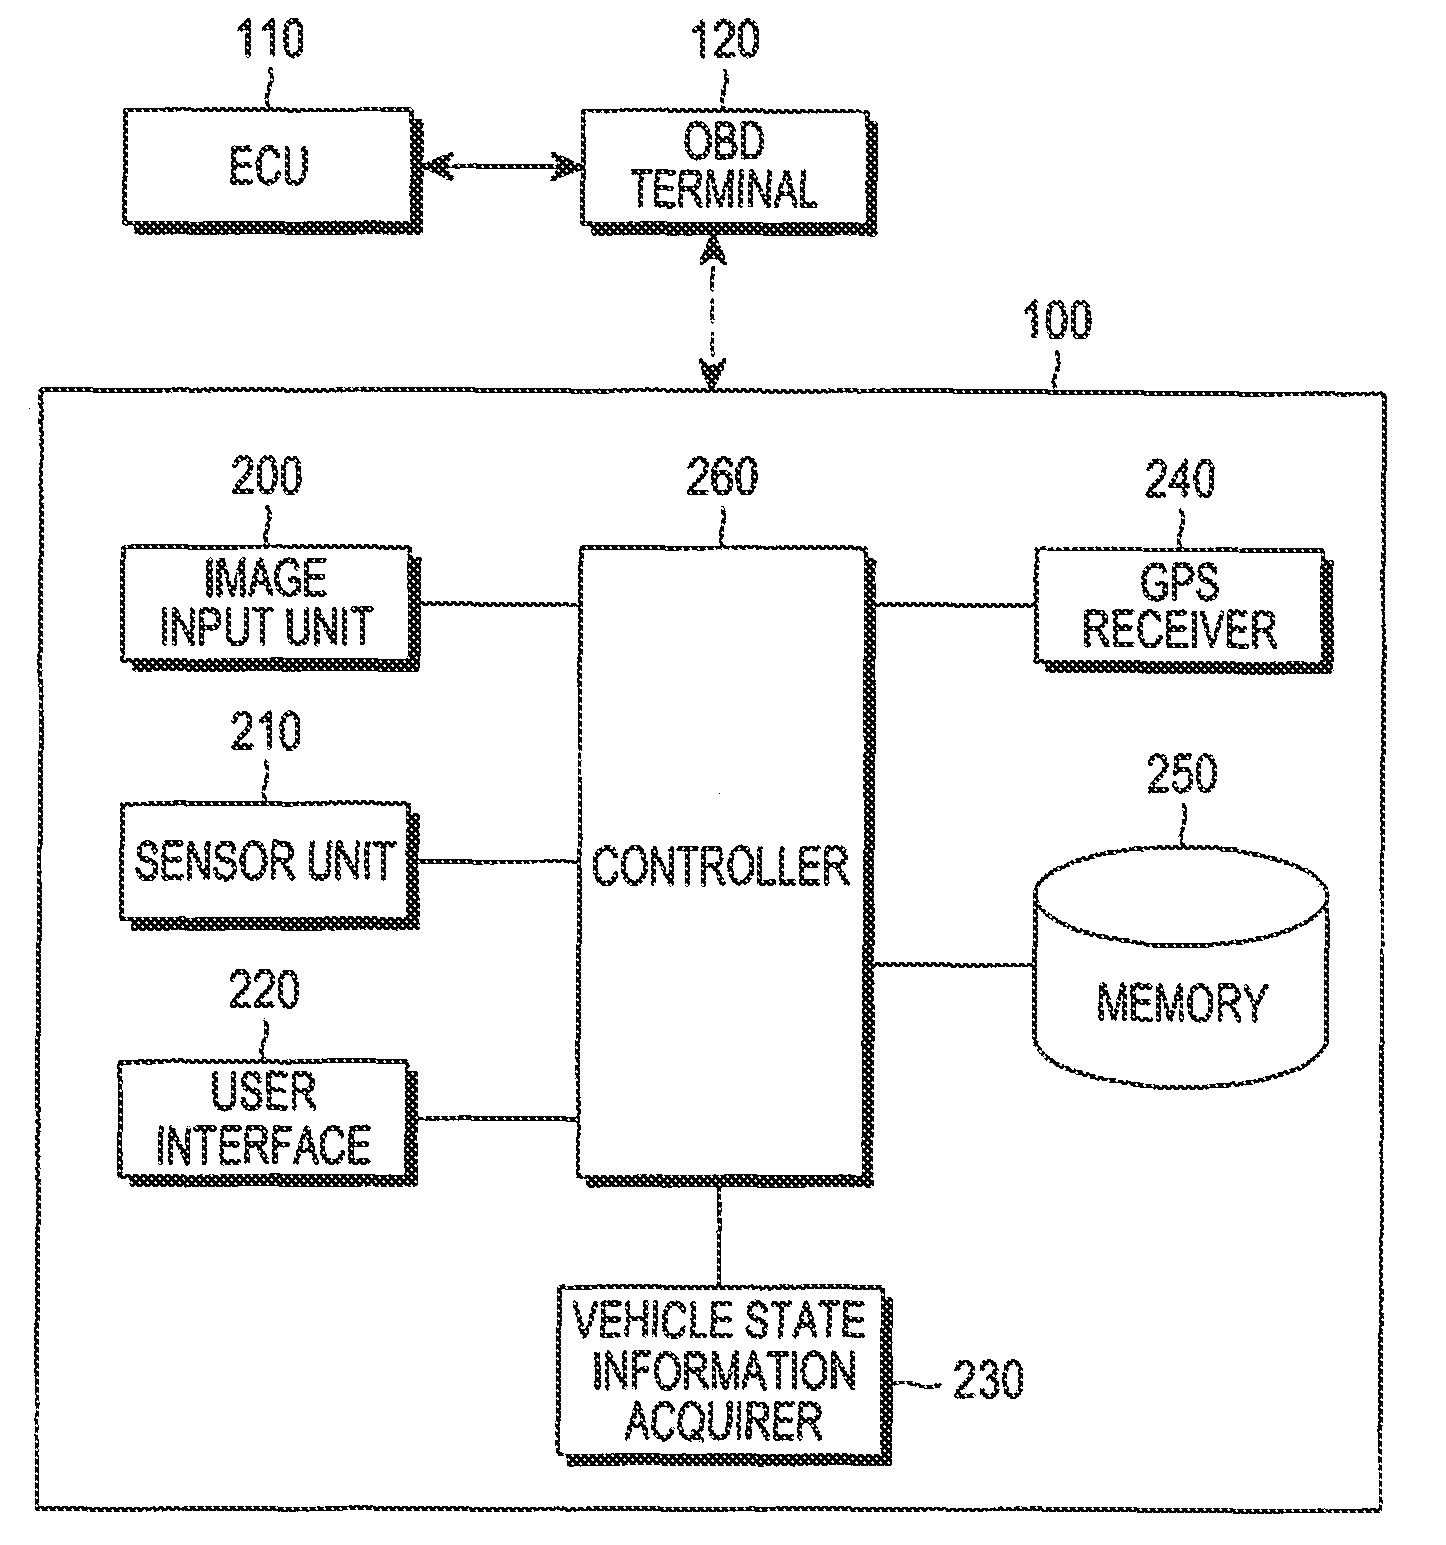 Apparatus and method for recording an image for a vehicle using on board diagnostic information